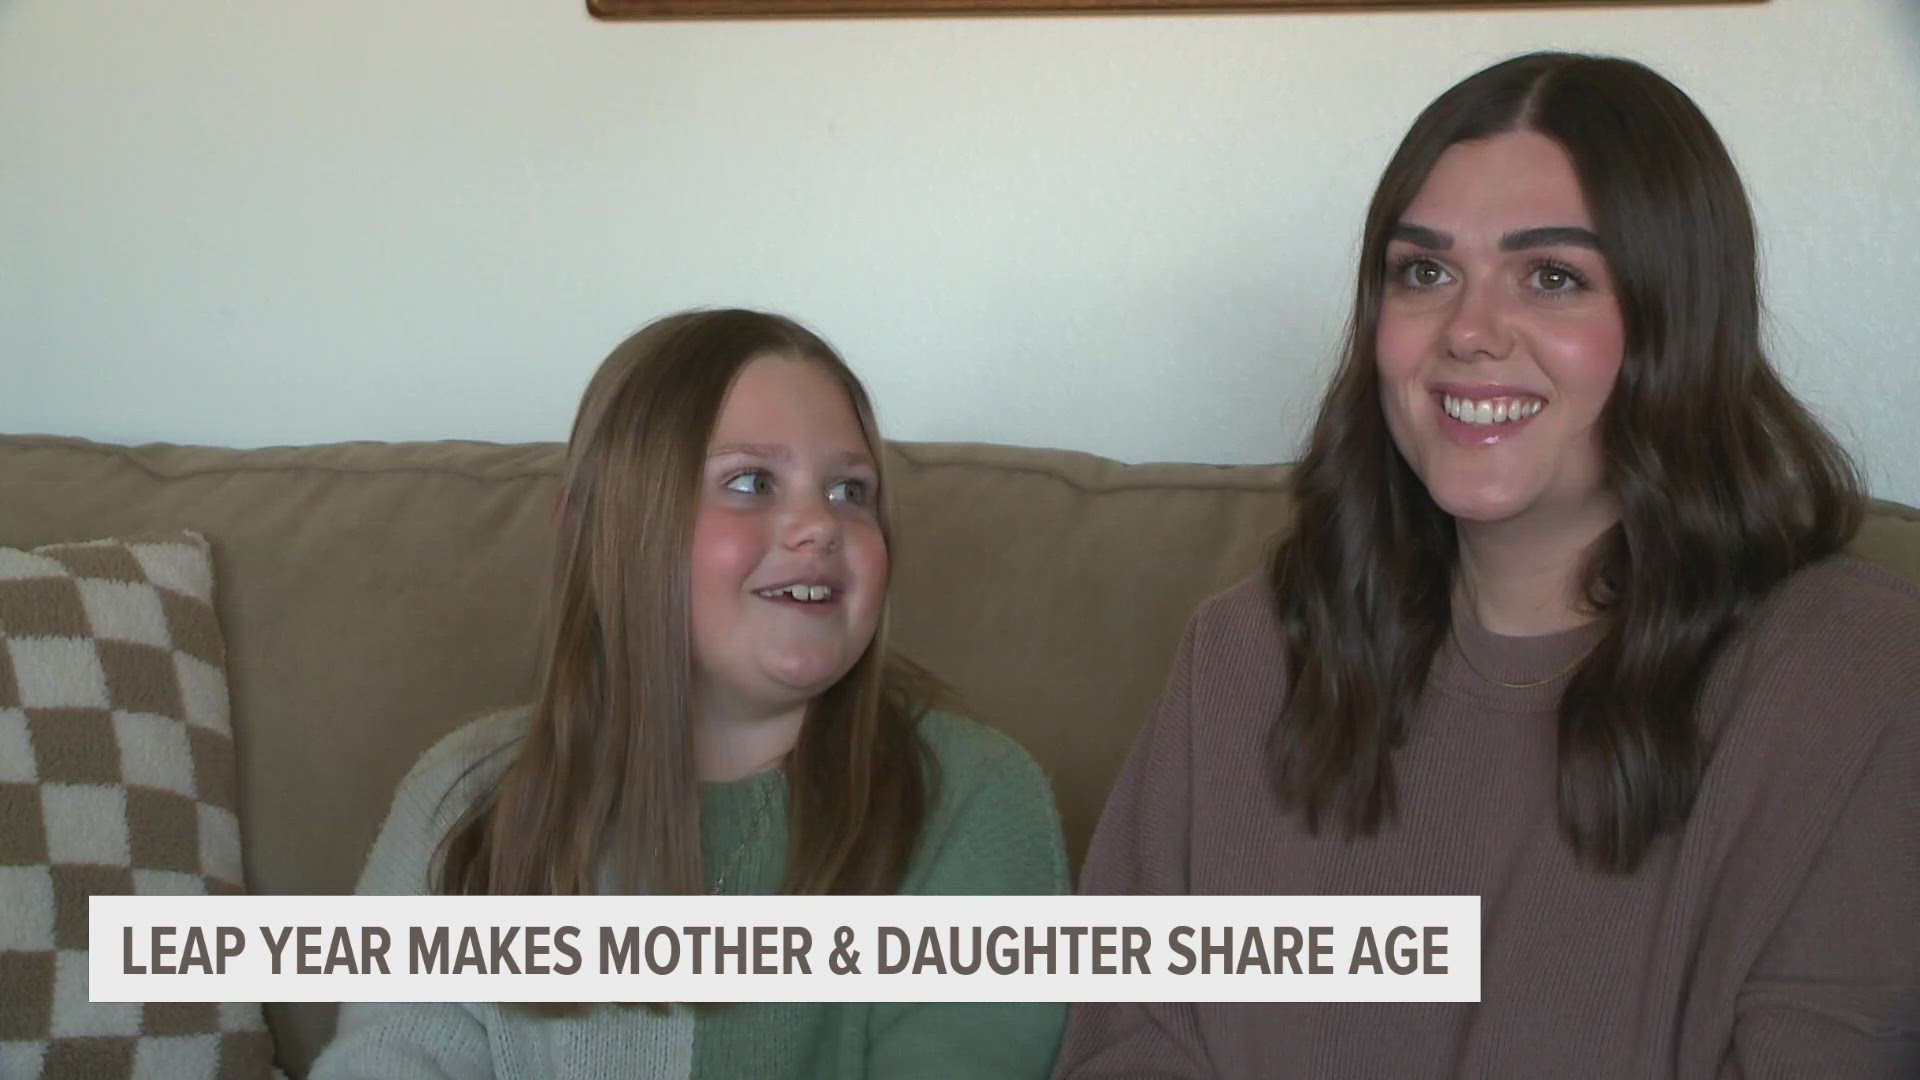 Erin Suttek and her daughter, Eleanor, are celebrating their same agedness: Erin is 32, or 8 years old in Leap Years, while Eleanor is 8 years old.